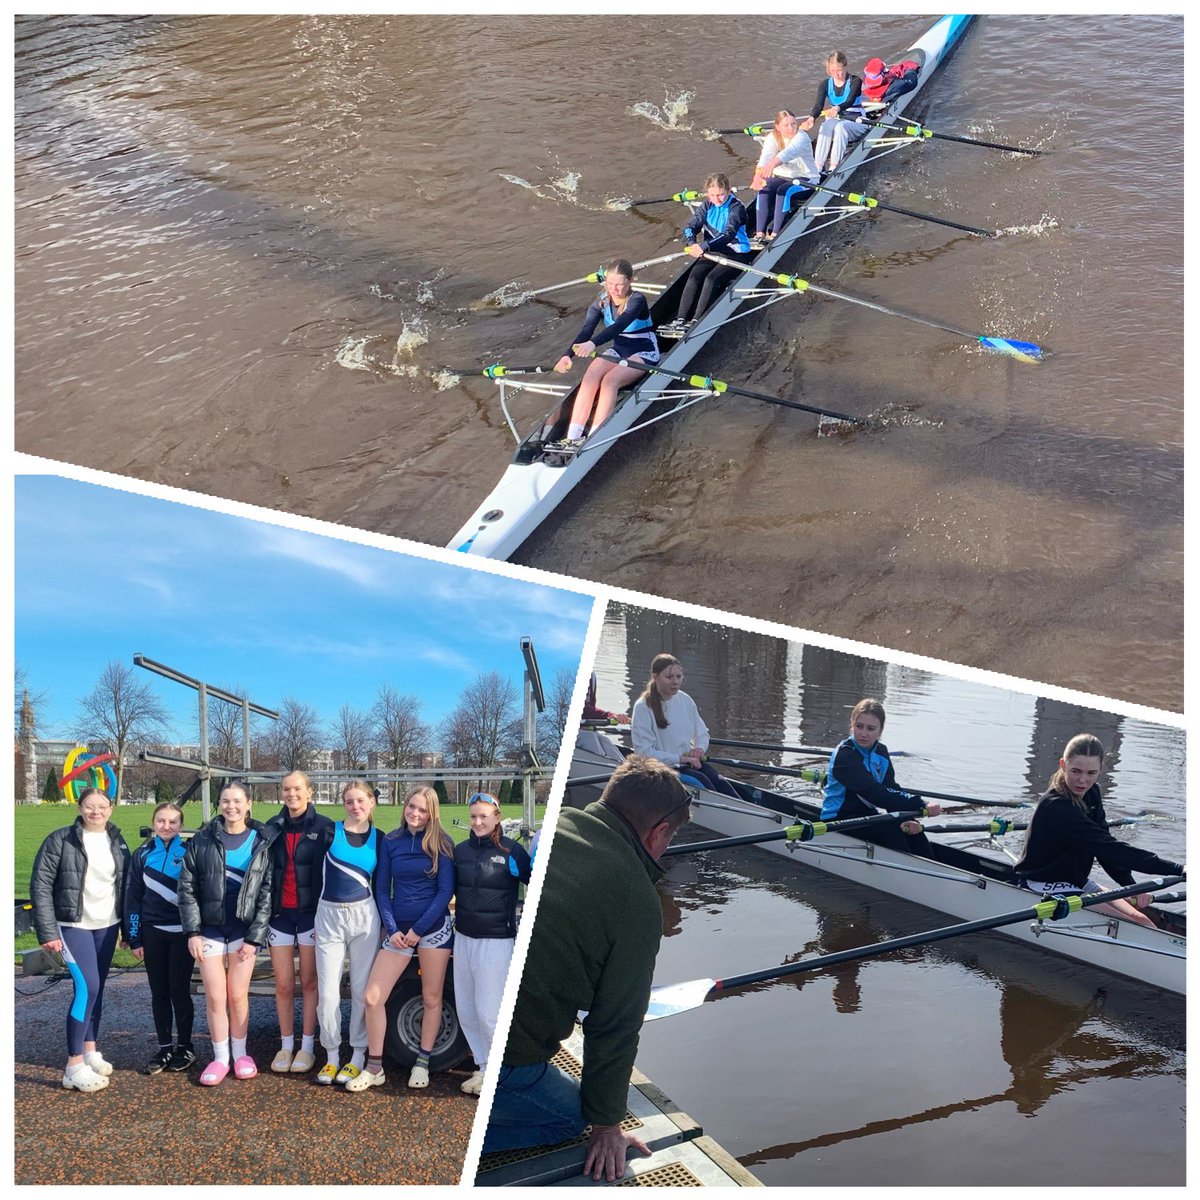 Absolutely brilliant to see one of our recent #CommunityRowing participants from @DalzielHigh racing on the Clyde today. Just shows the talent of our local young people & how quickly they can progress 👏👏👏@NLActiveSchools @DLFutureFriday @SP_RC1 @ScottishRowing @LoveRowing_BRCF